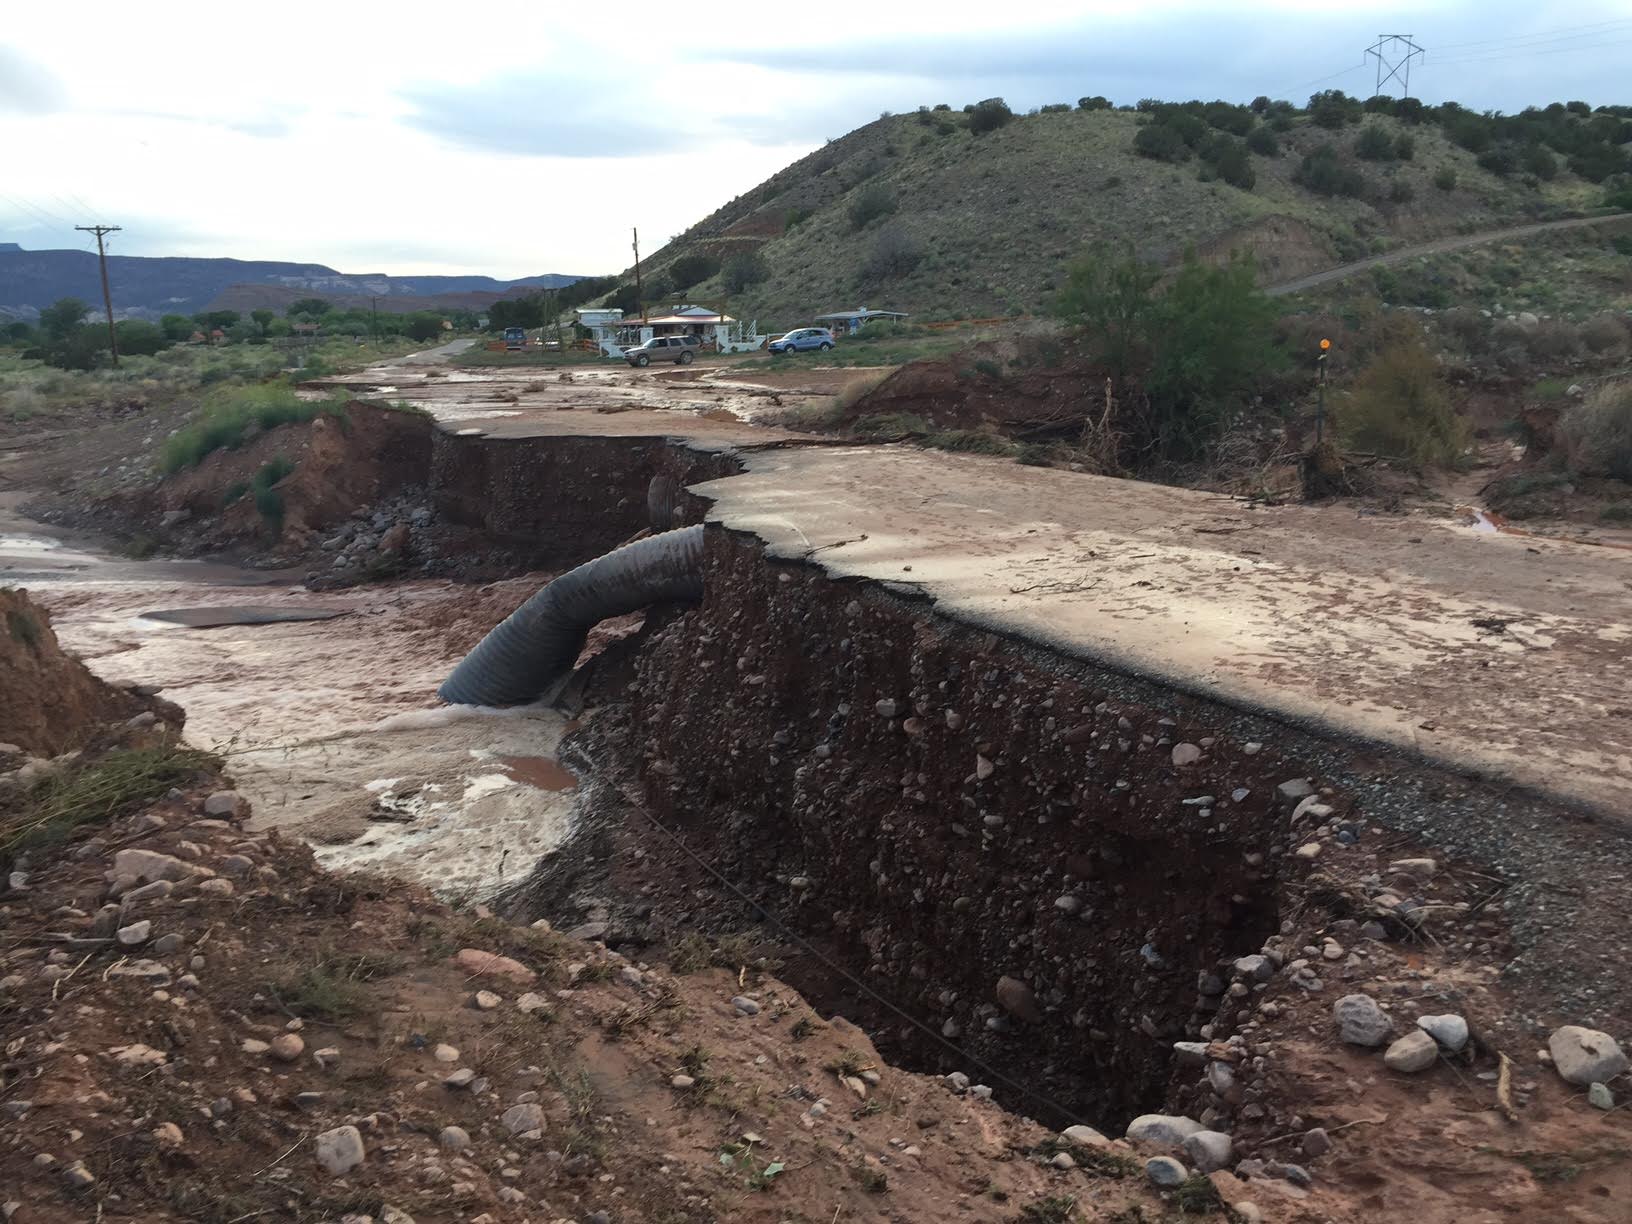 Road damage from a flash flood in Abiquiu, New Mexico